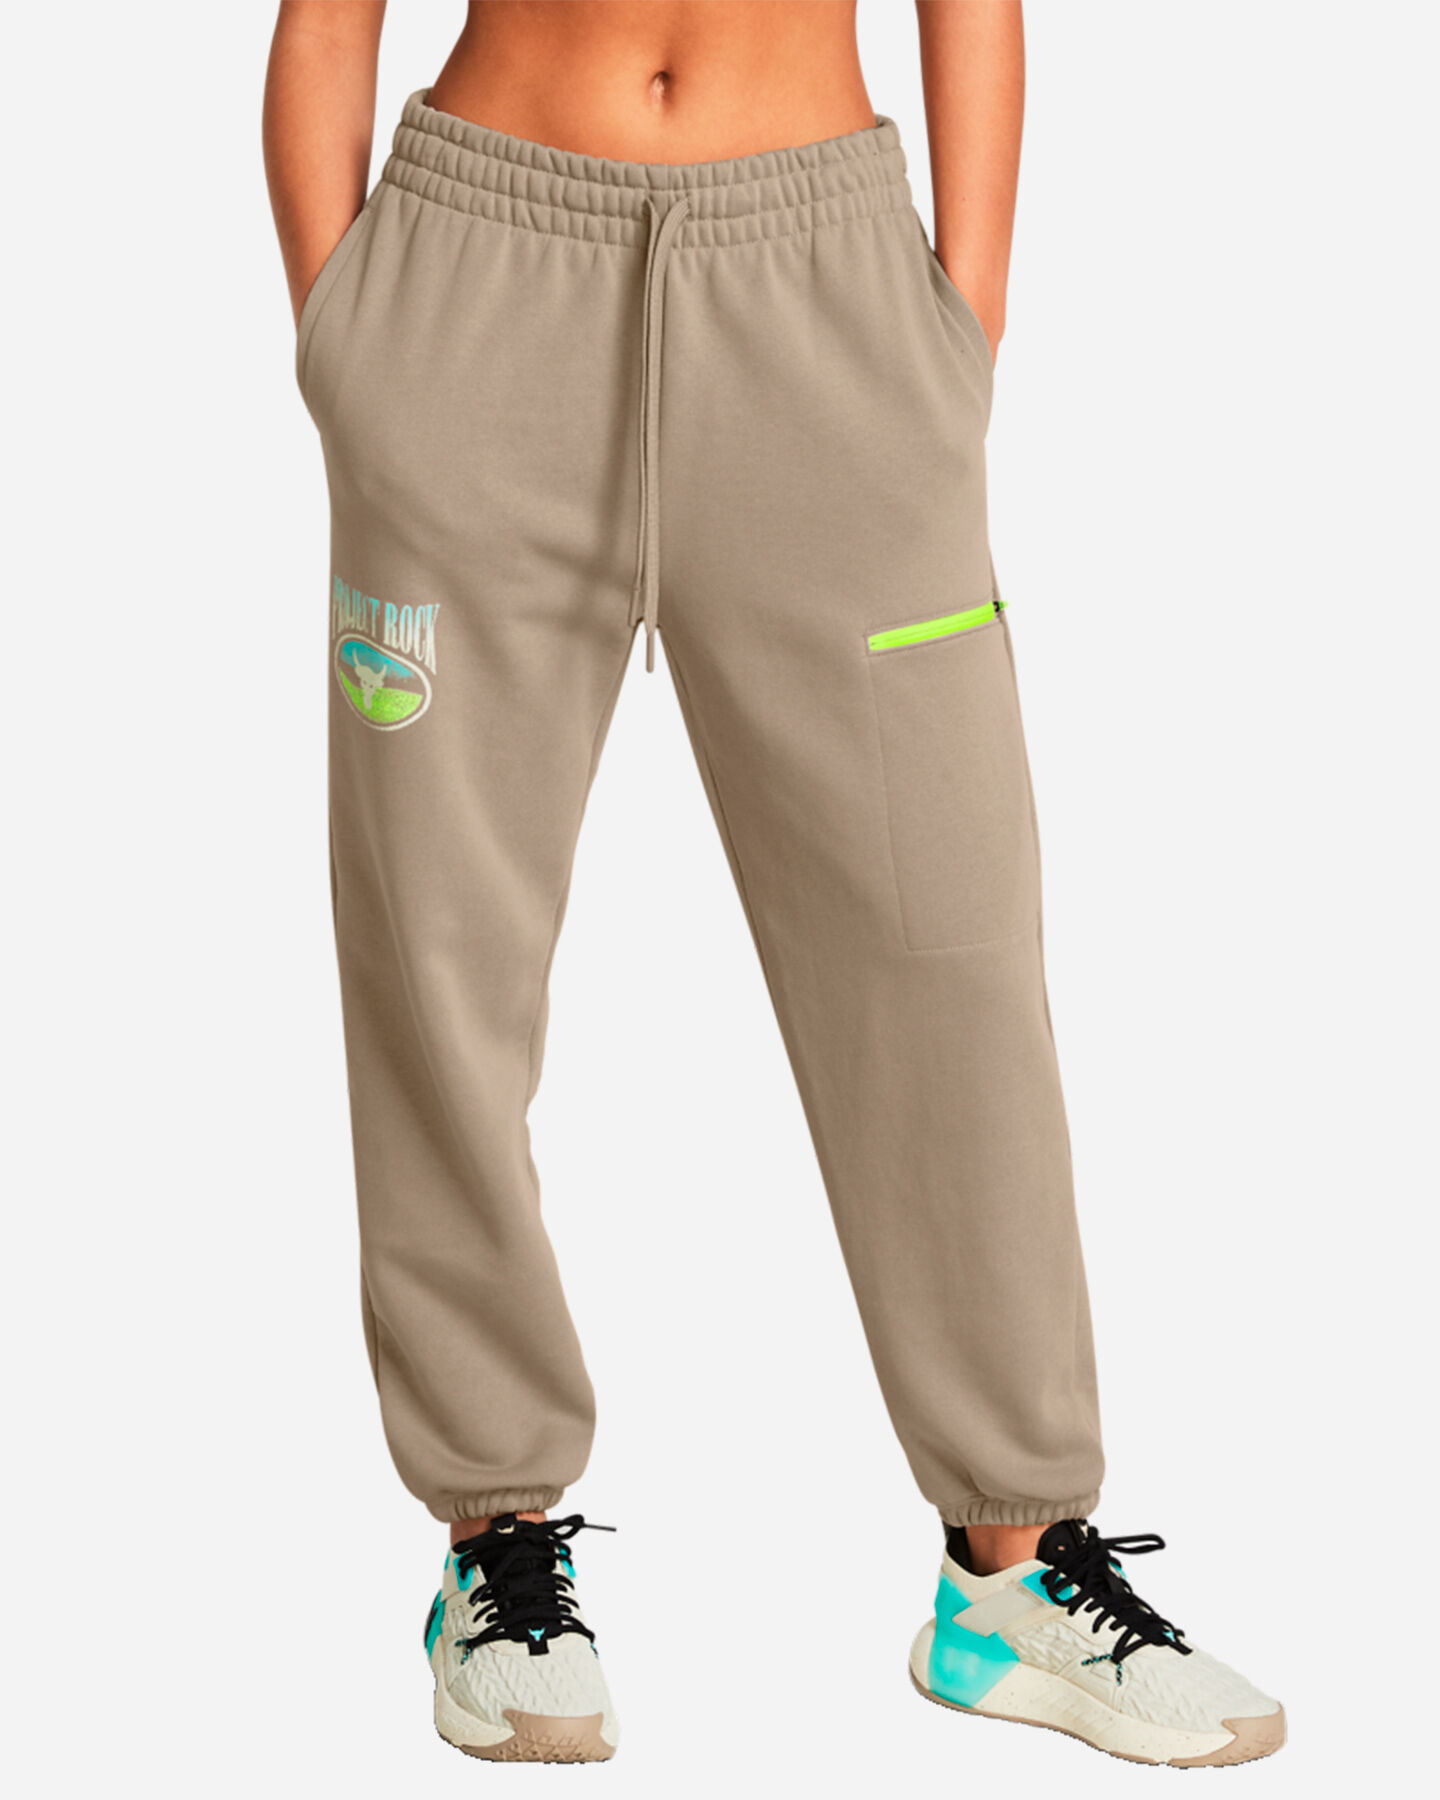  Pantalone UNDER ARMOUR PJT ROCK Q1 W S5641775|0203|XS scatto 2